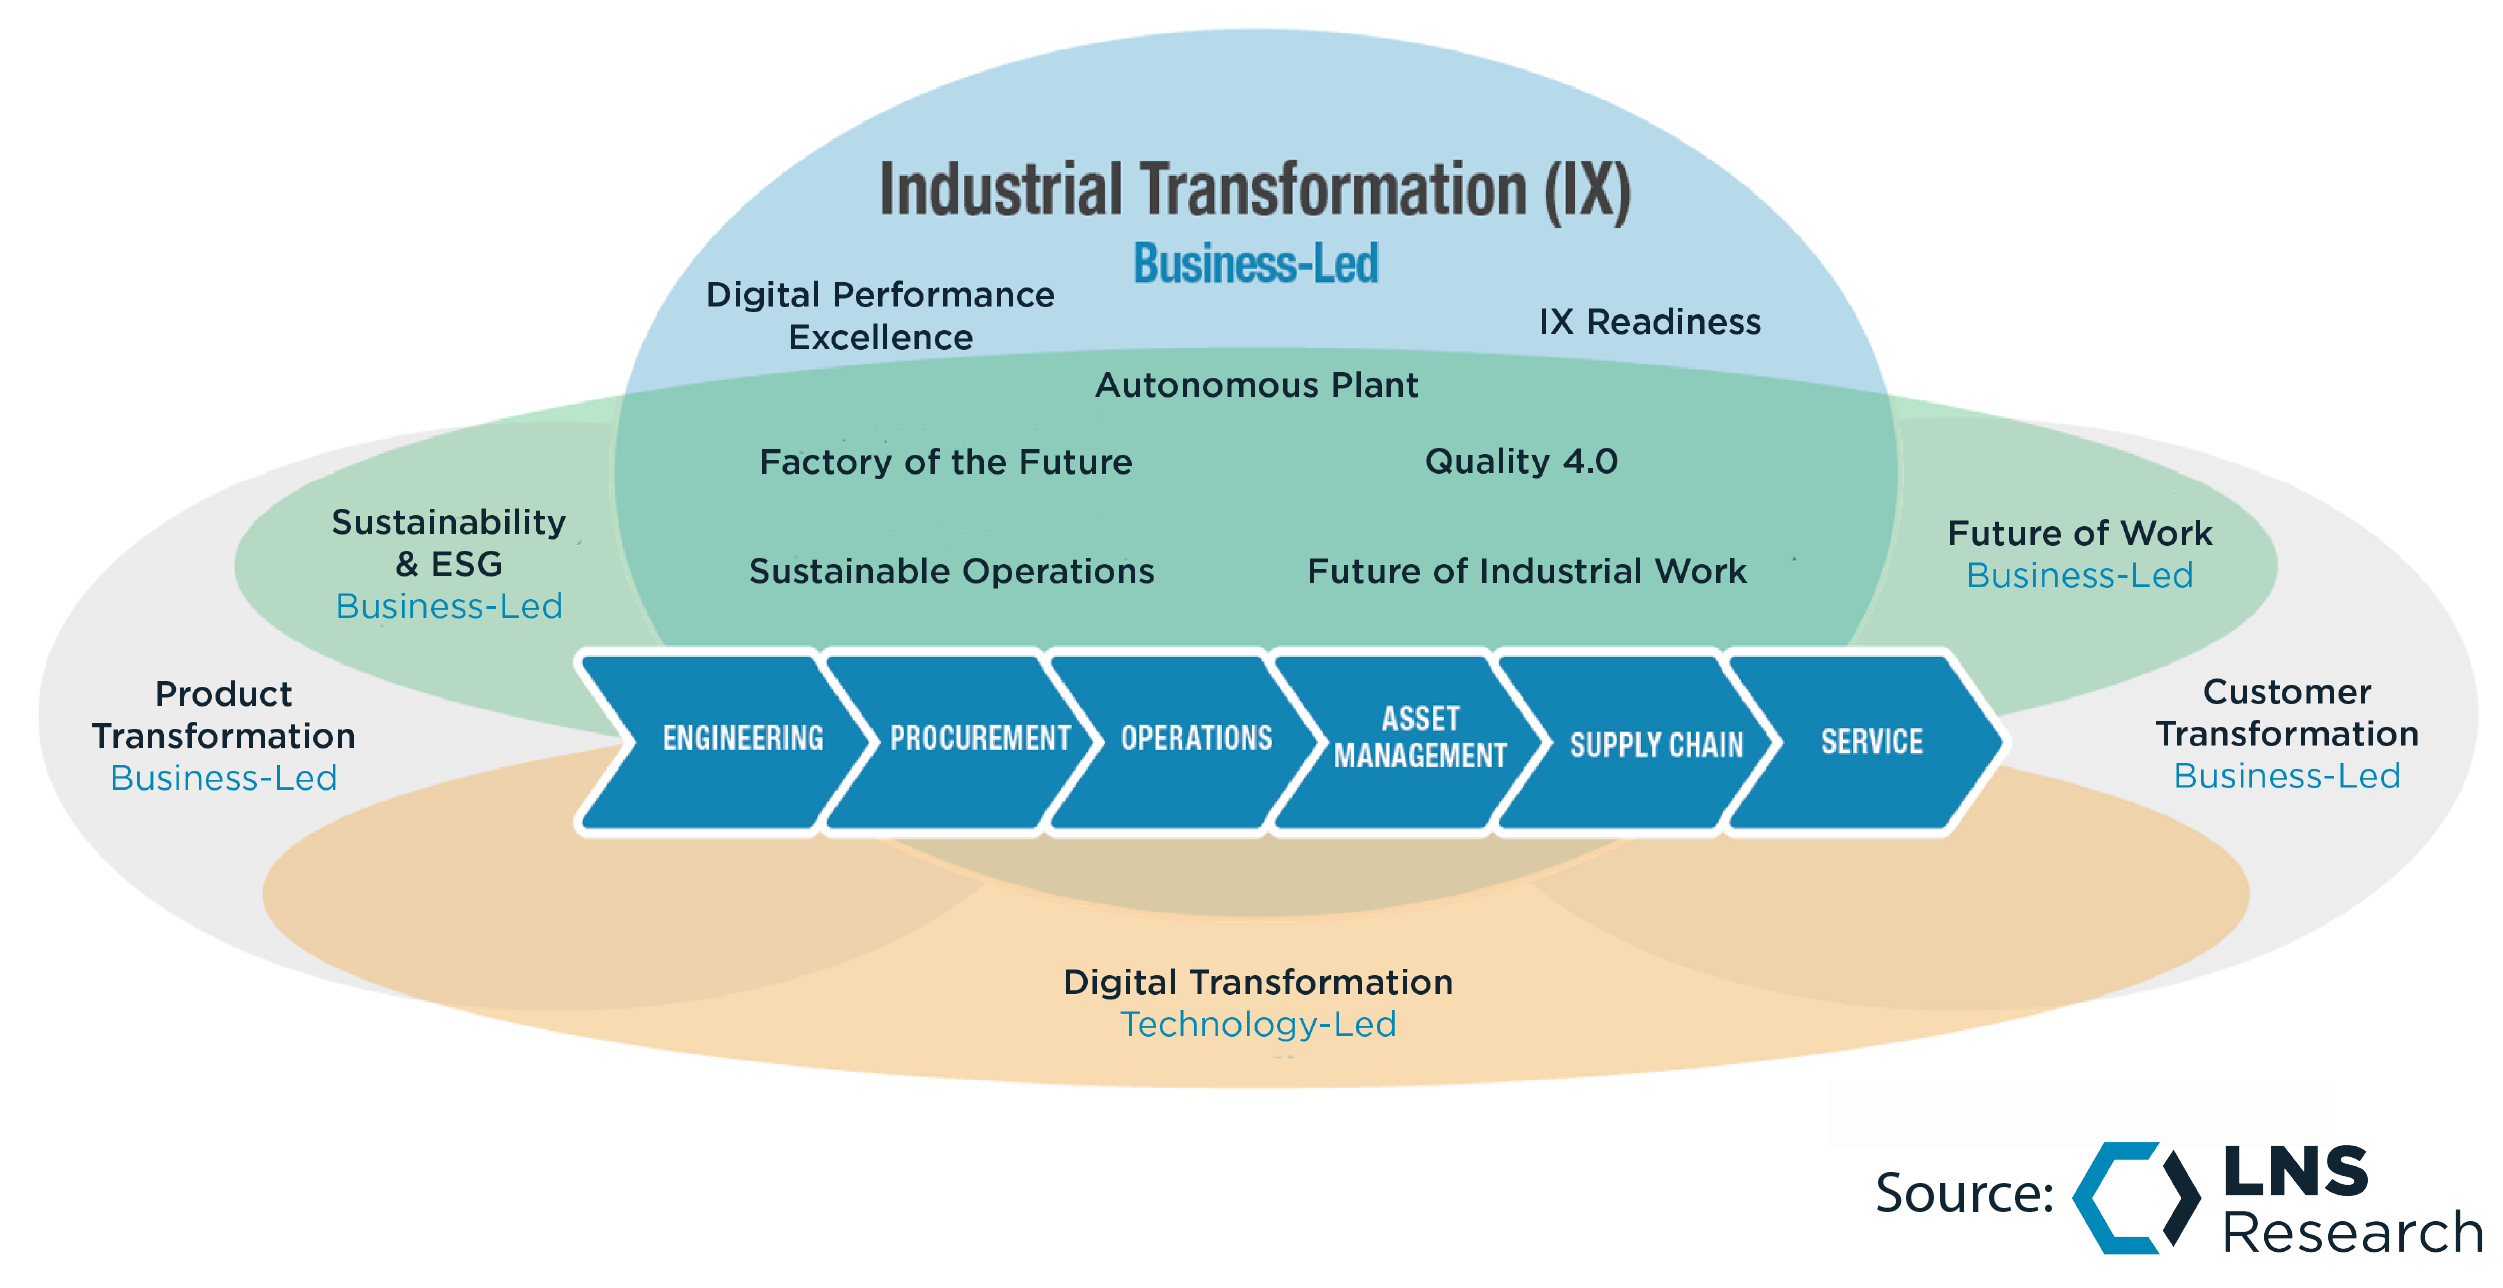 Successful industrial transformation requires every department to partner in bringing vision to value.